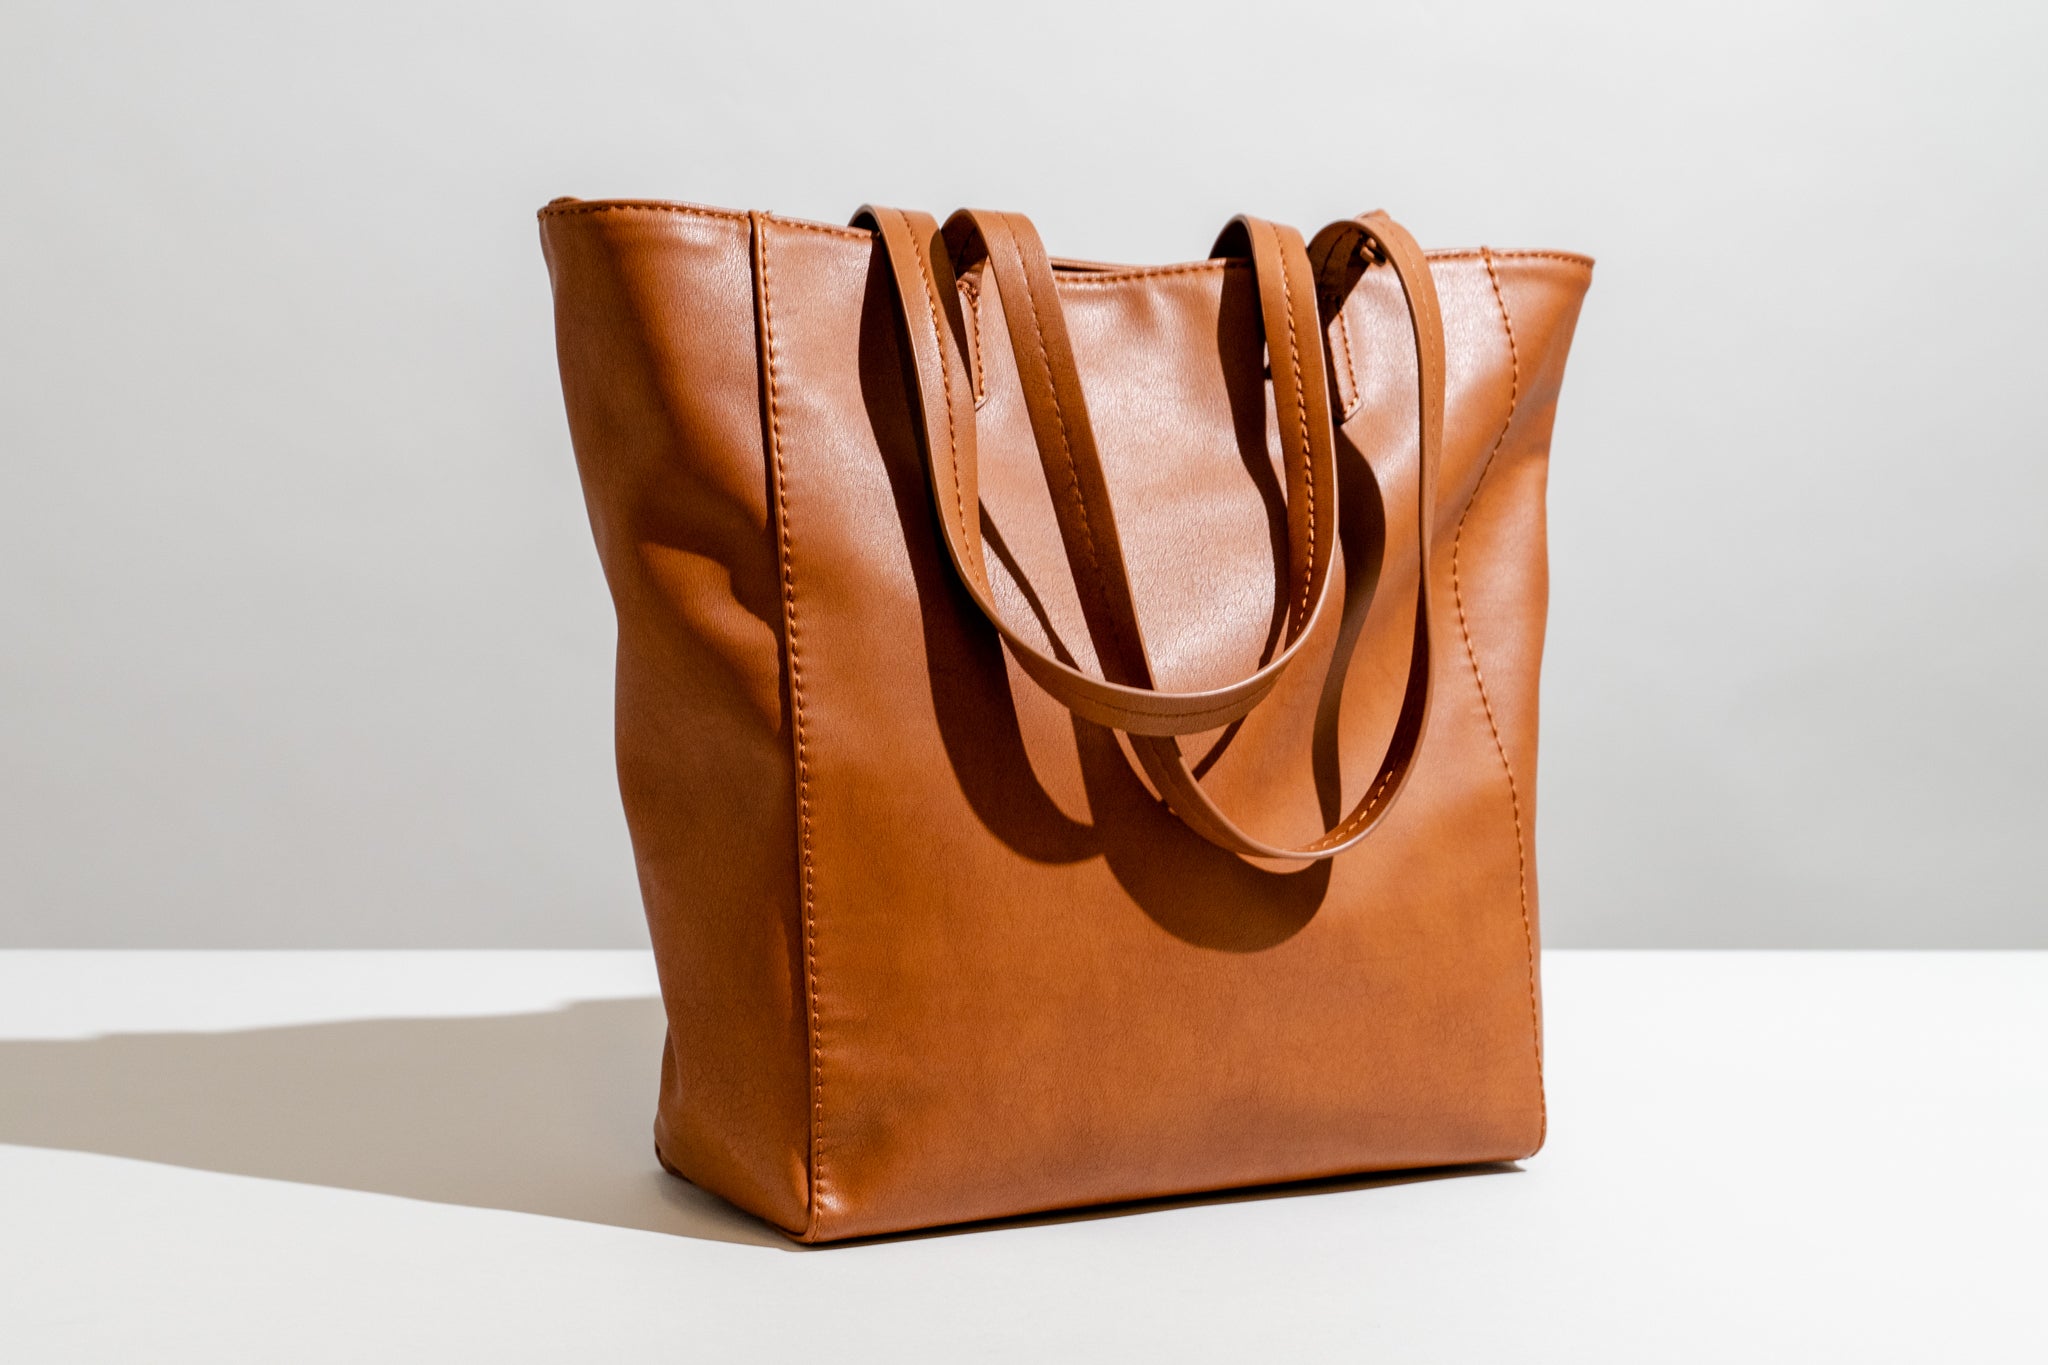 Vegan leather tote bag with lots of pockets and structure: Universal Thread Hayden Tote Handbag